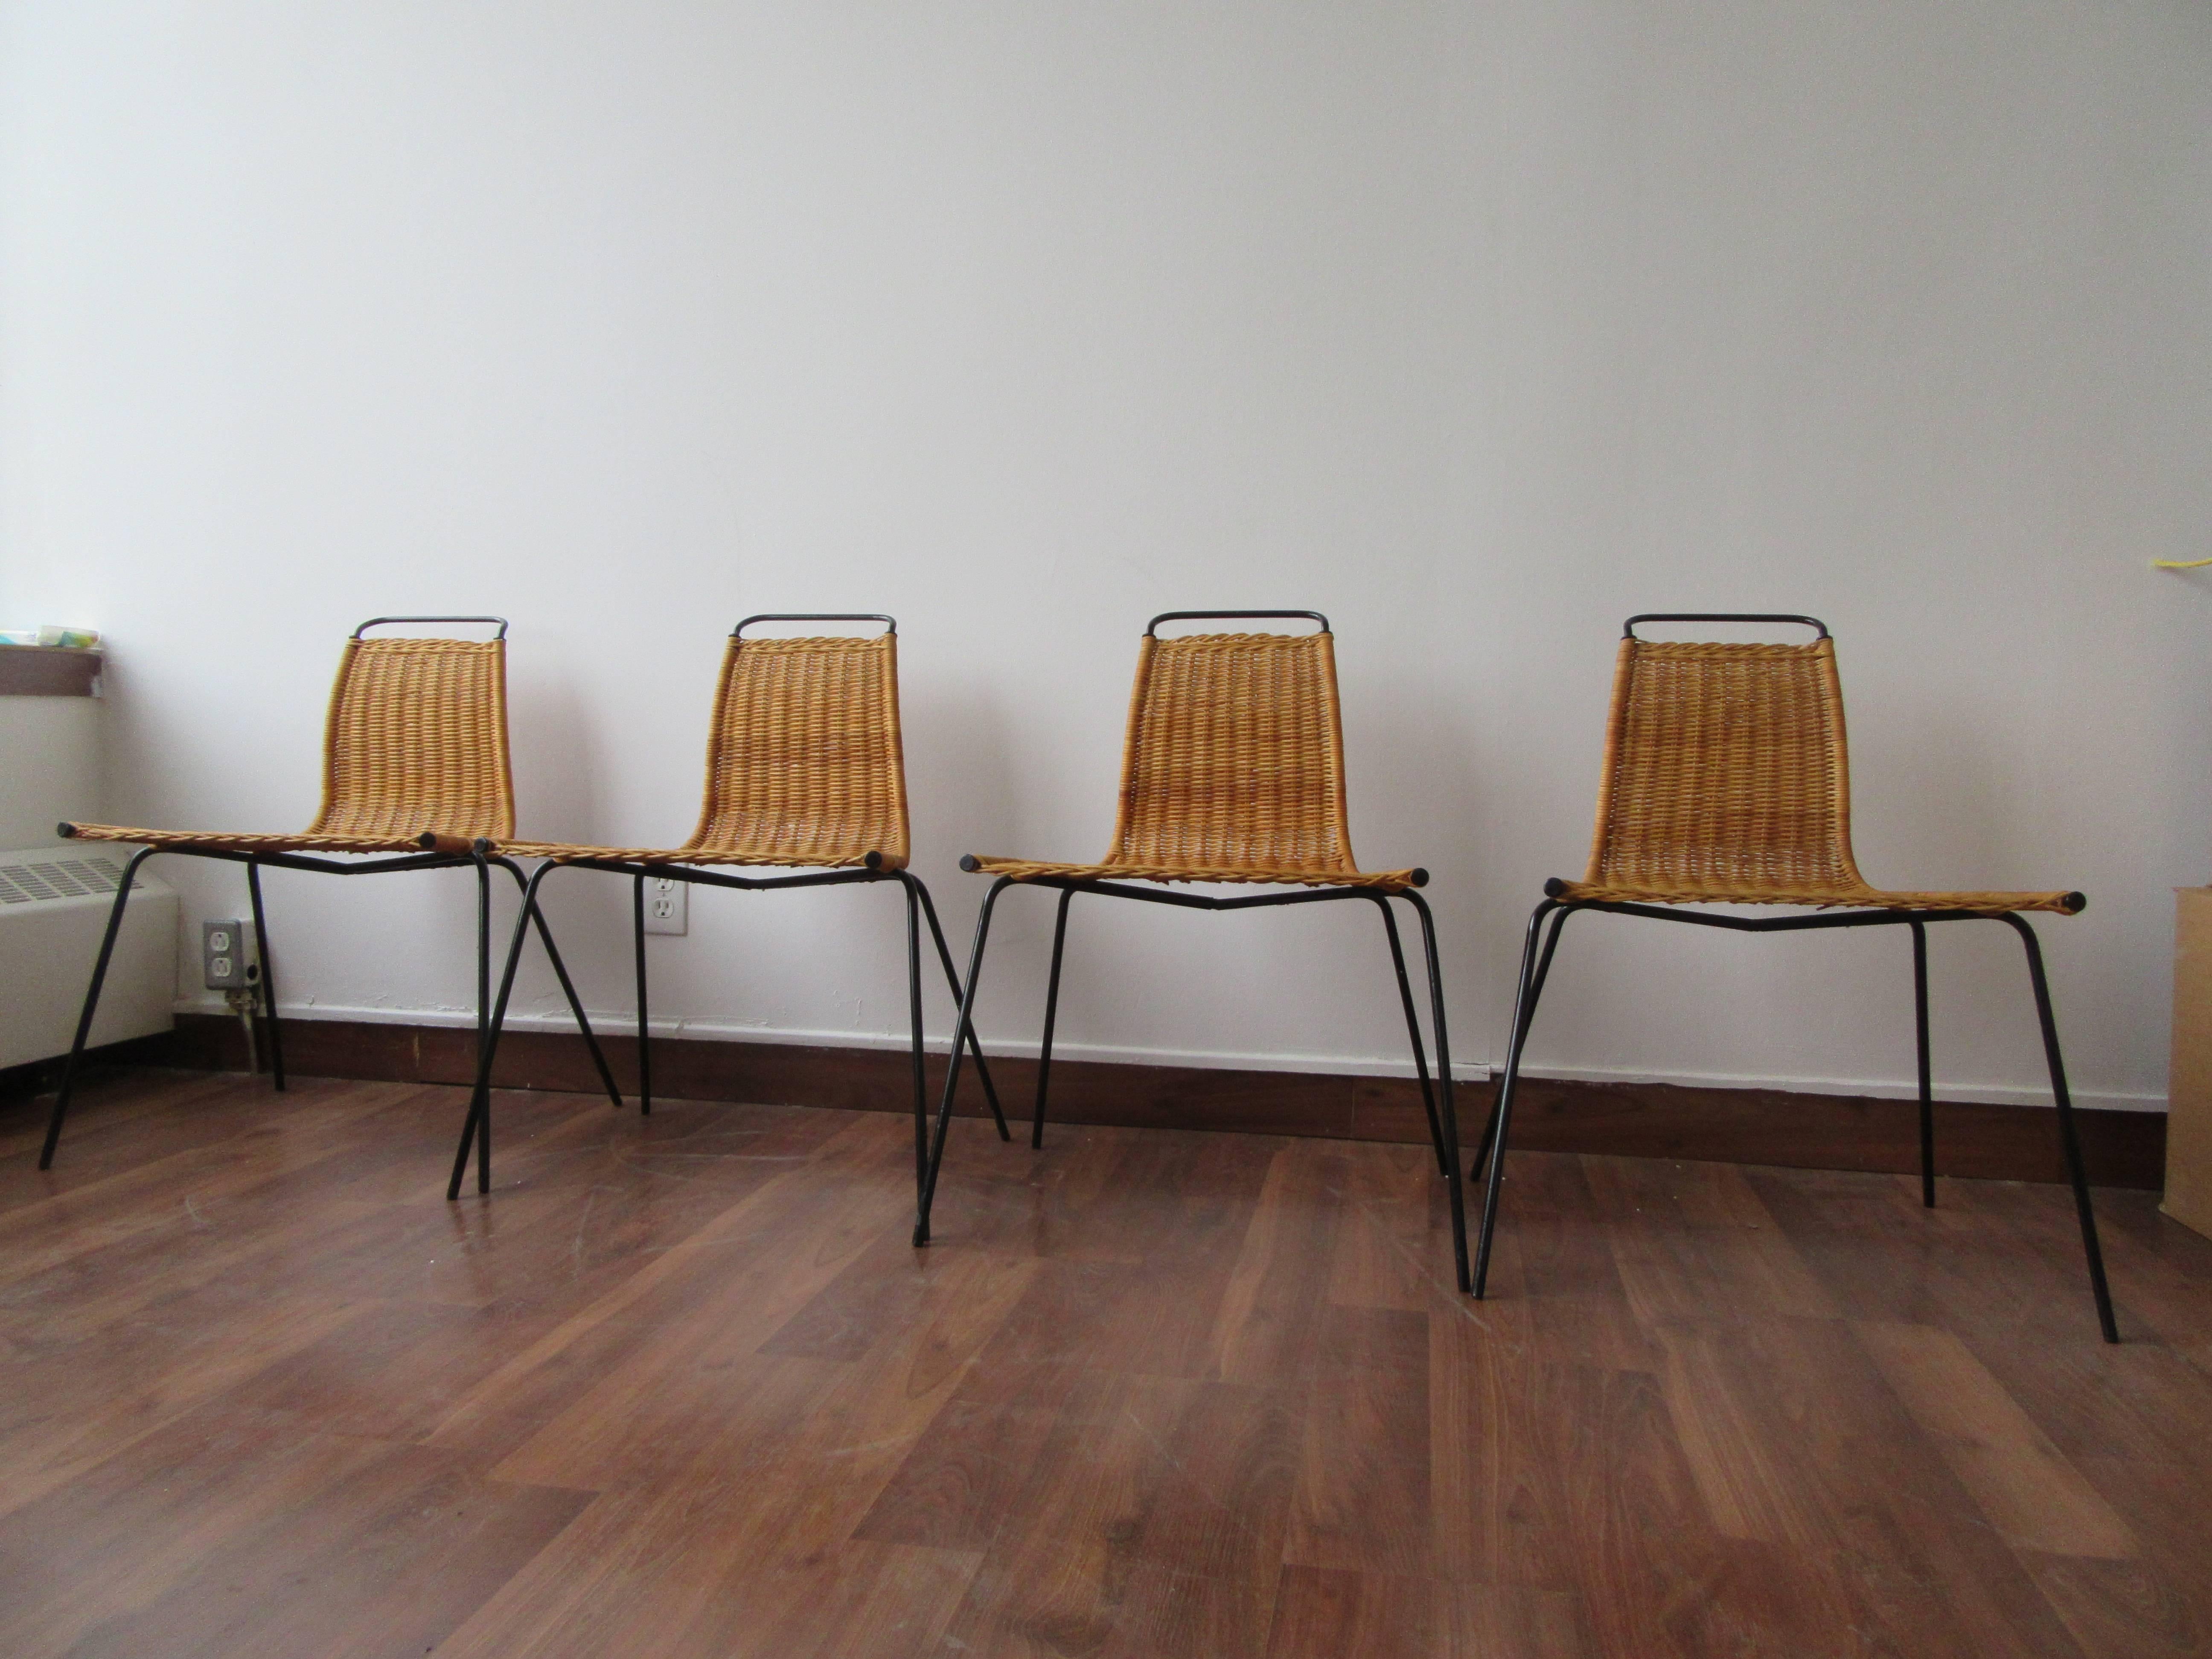 A set of four PK1 chairs by Poul Kjærholm. Featuring a steel frame and wicker upholstery. Eye-catching design from the 1950s.